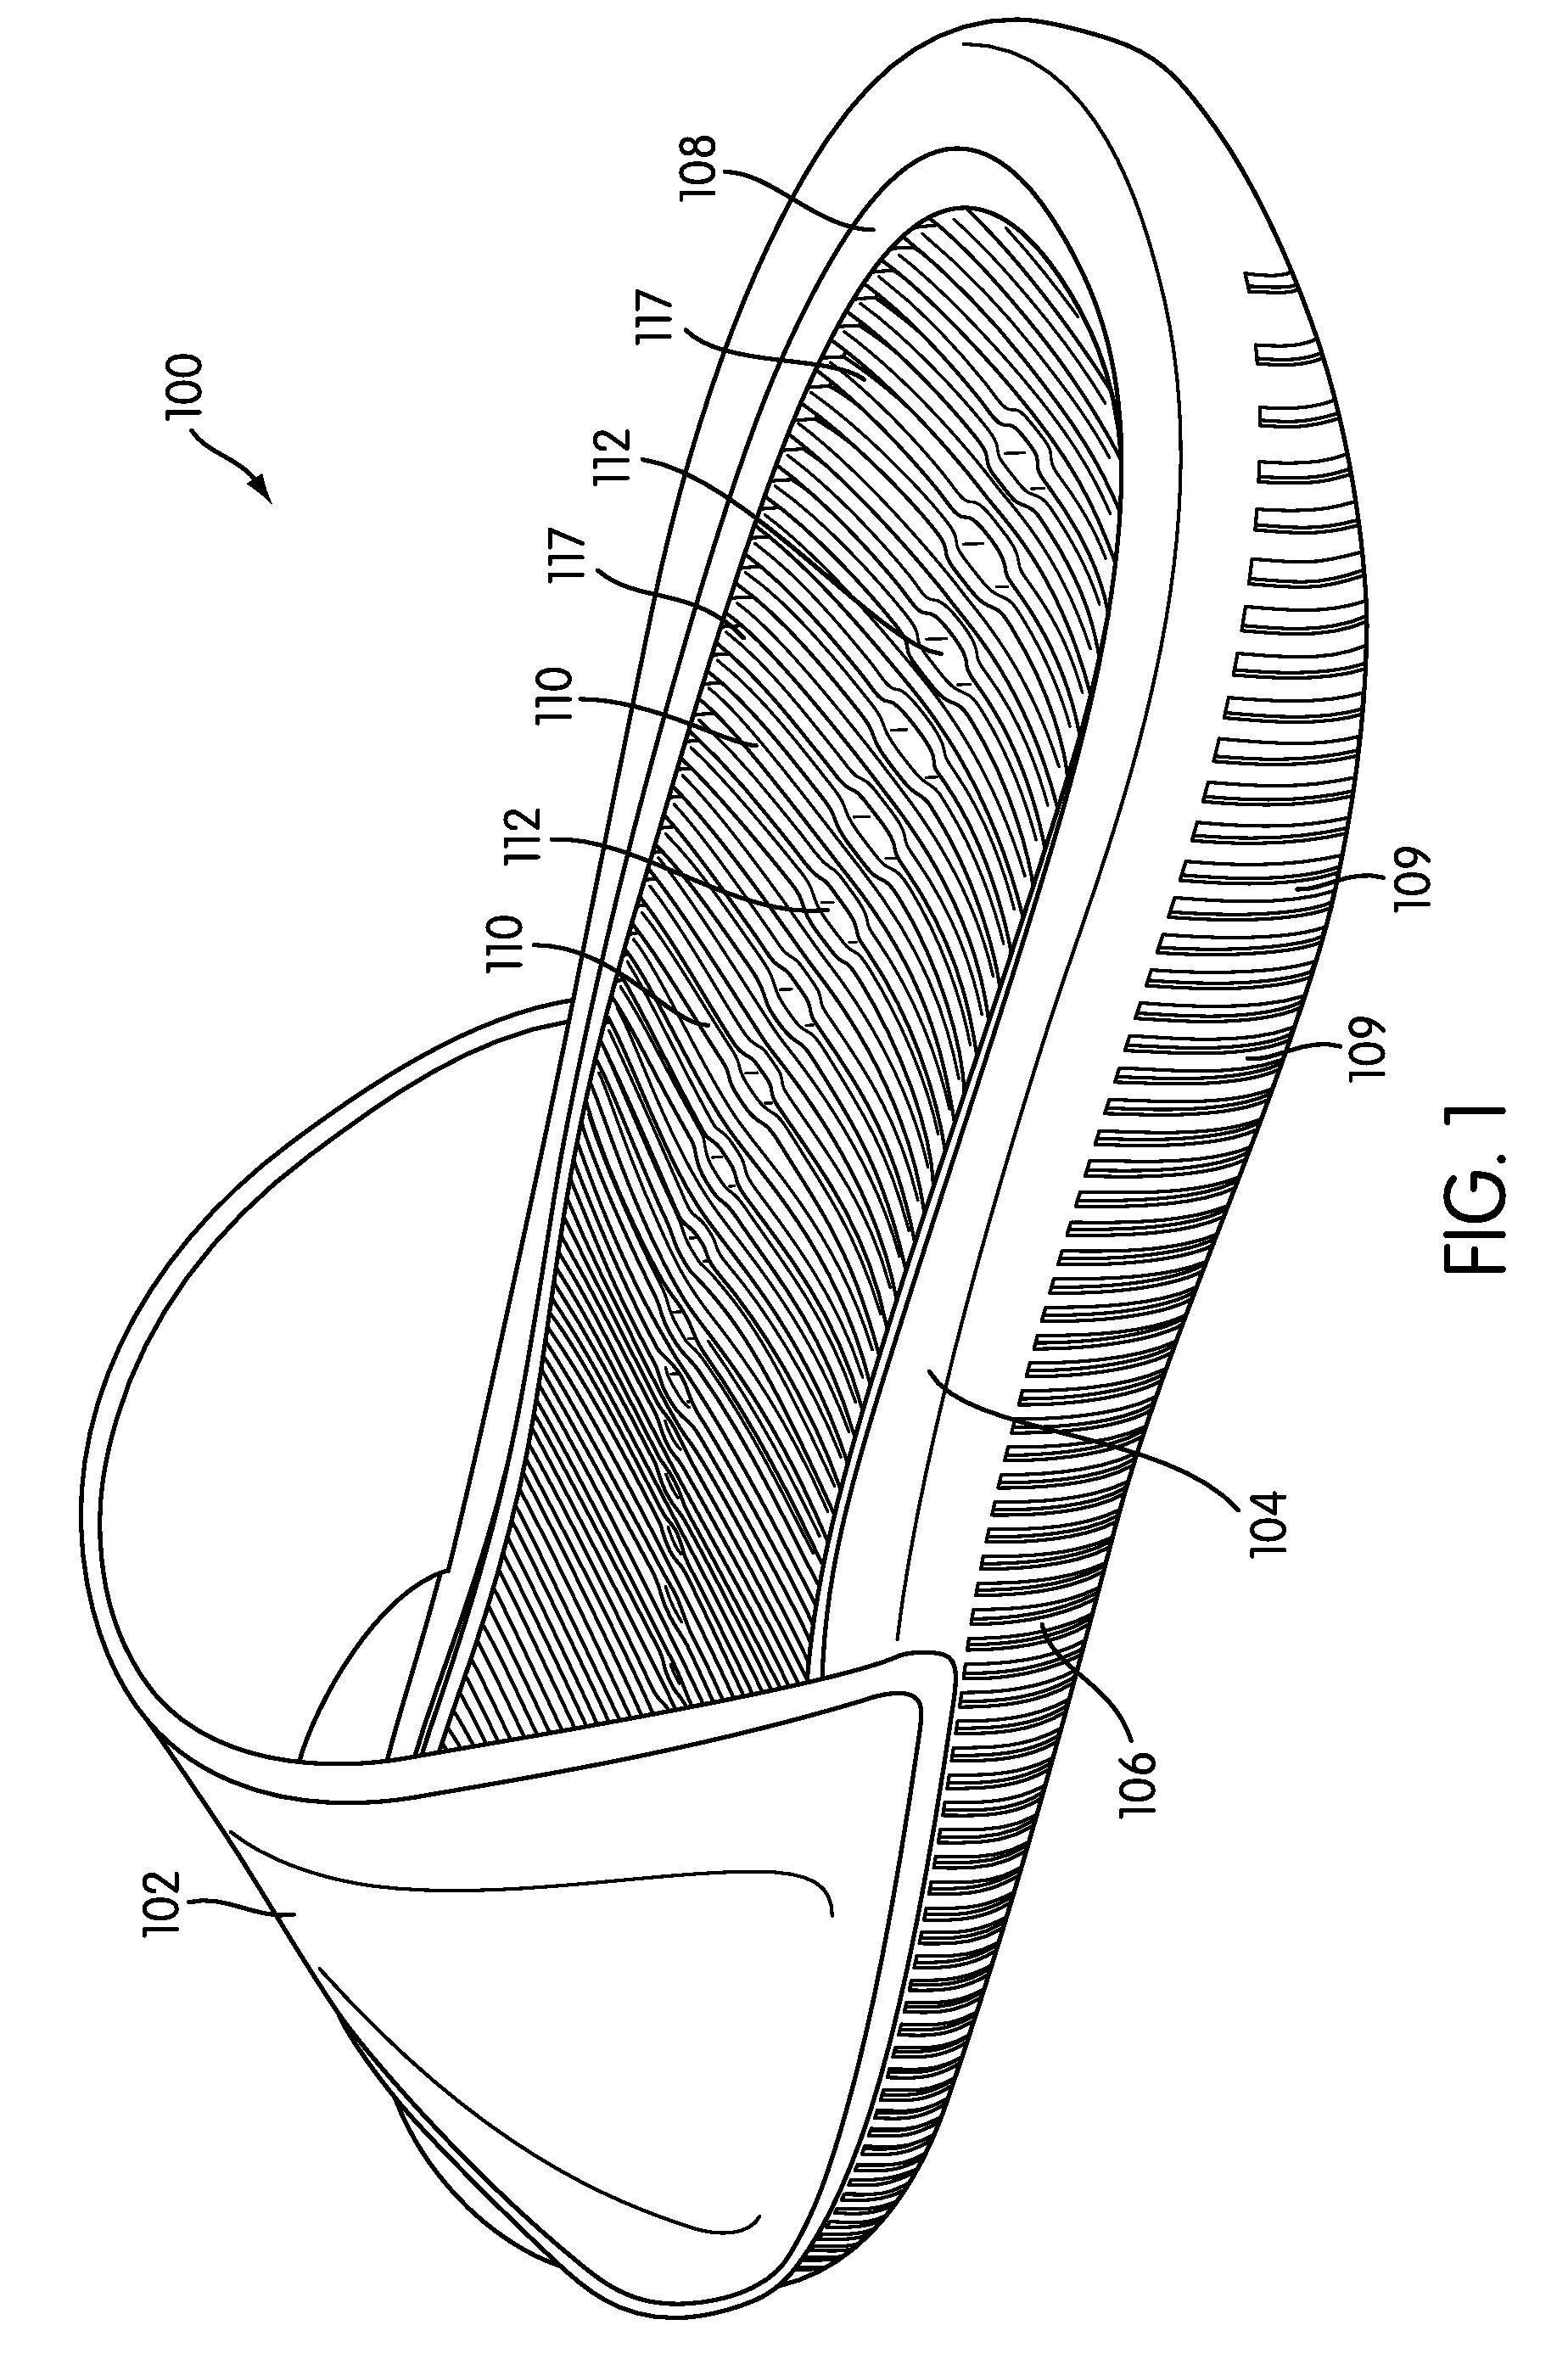 Article of Footwear with Drainage Features